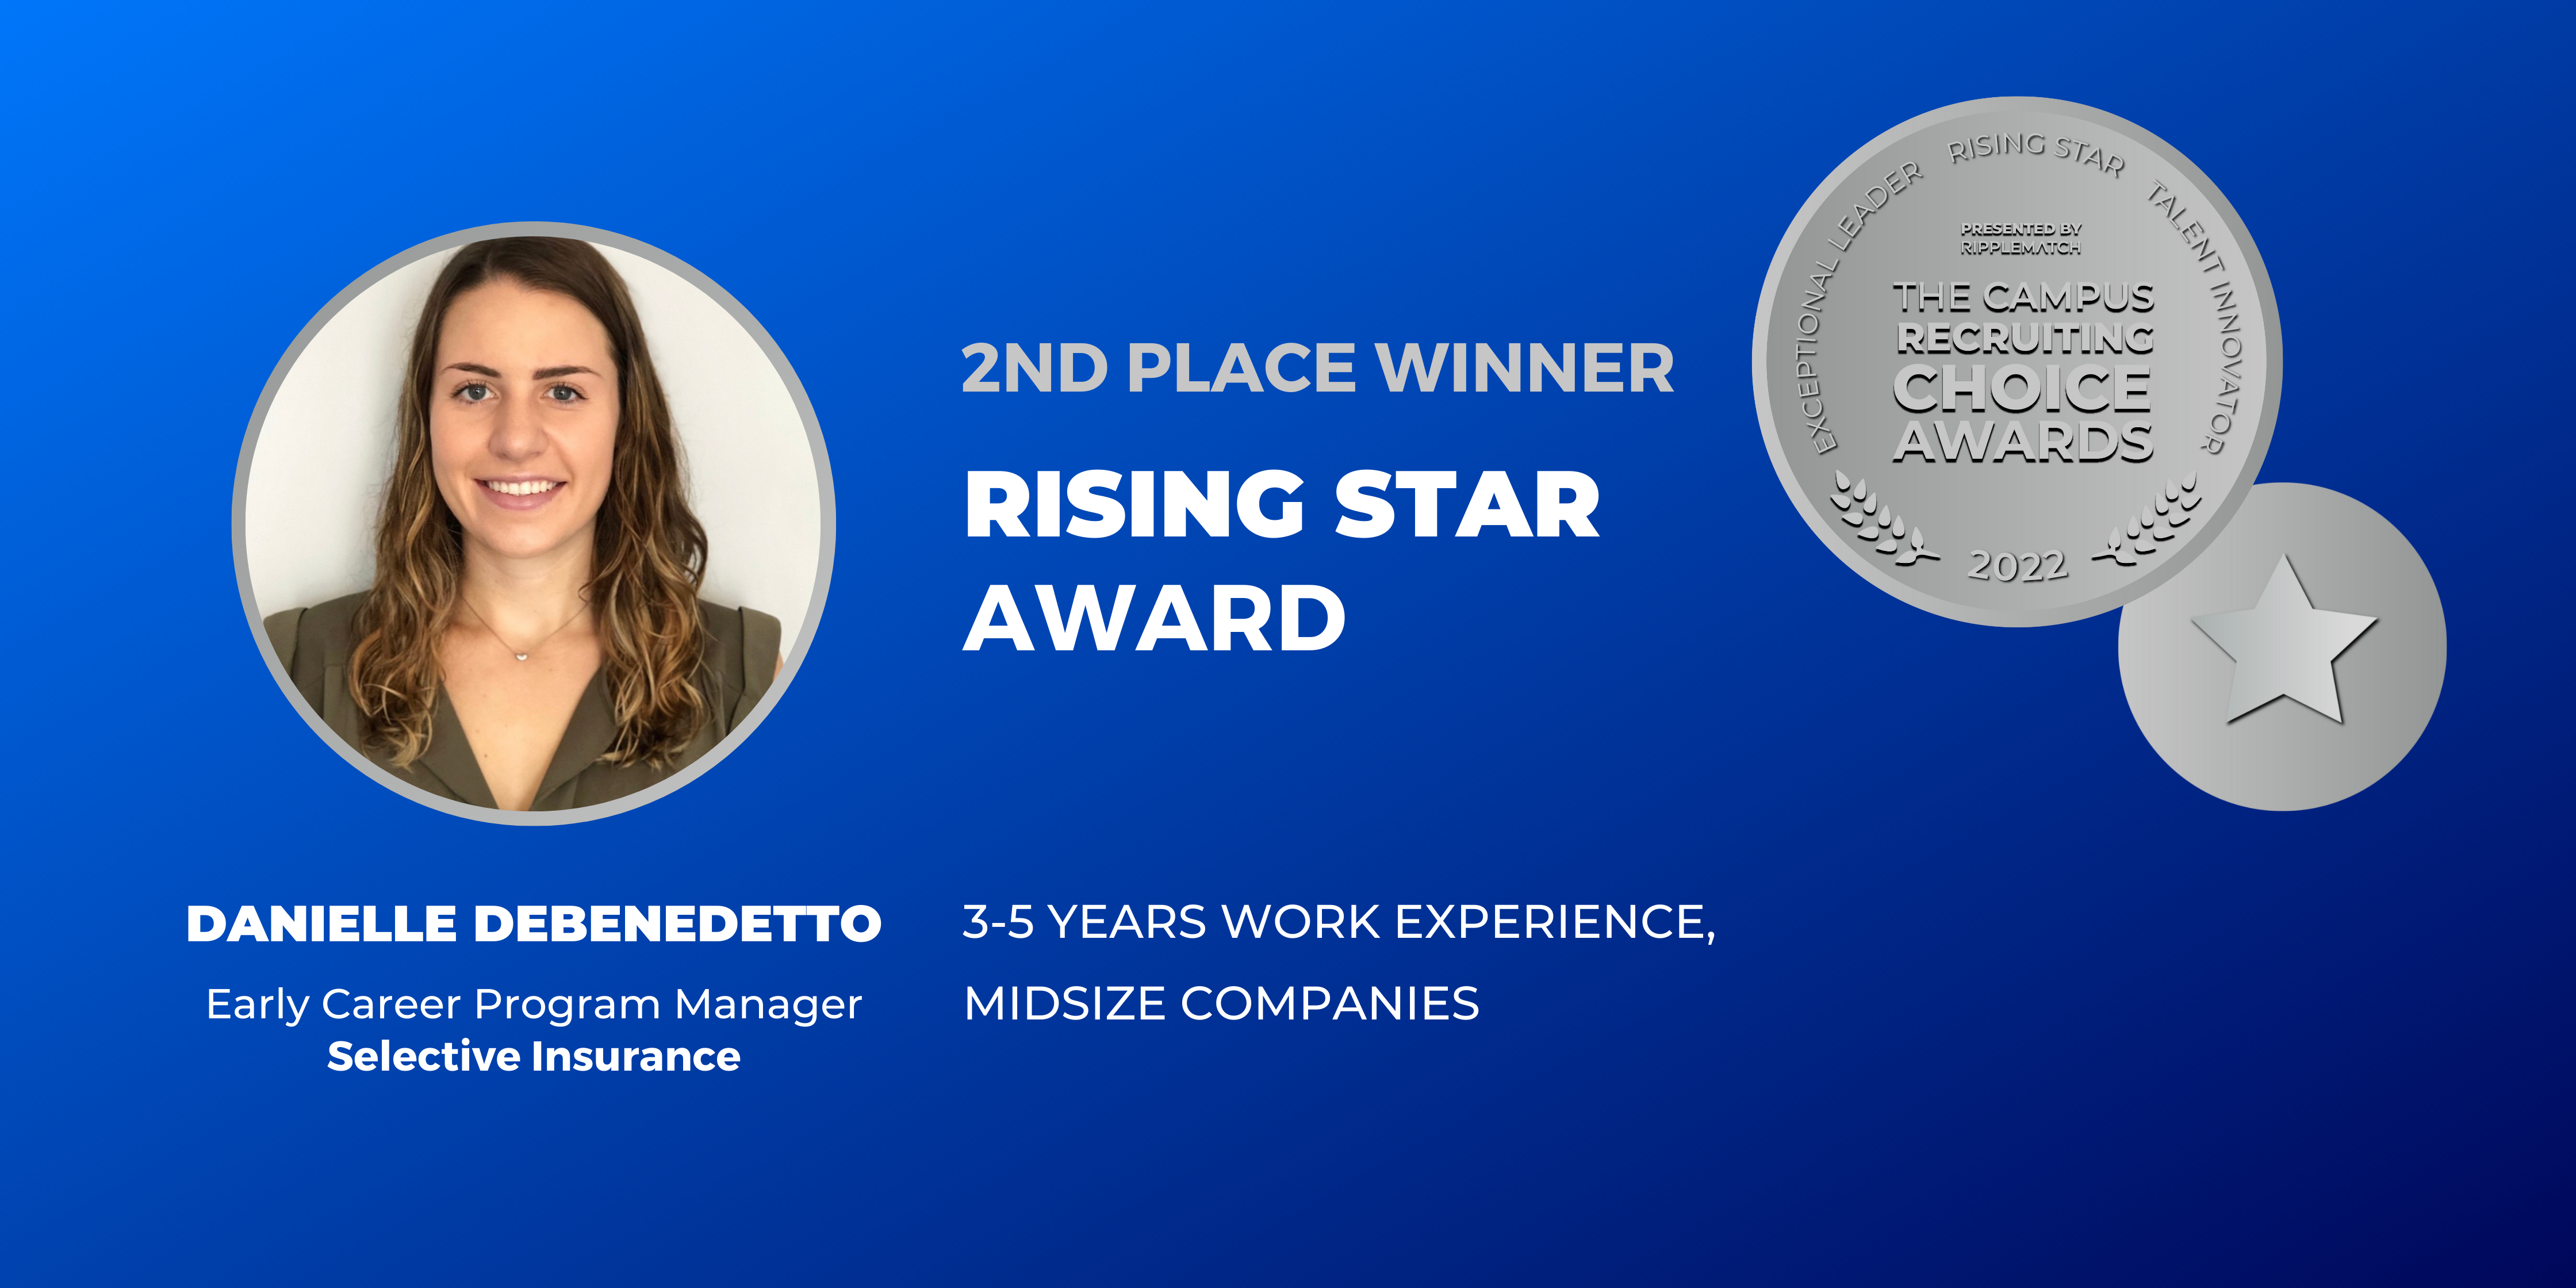 RISING STAR - 2nd place - 3-5 Years Work Experience, Midsize Companies - Danielle DeBenedetto